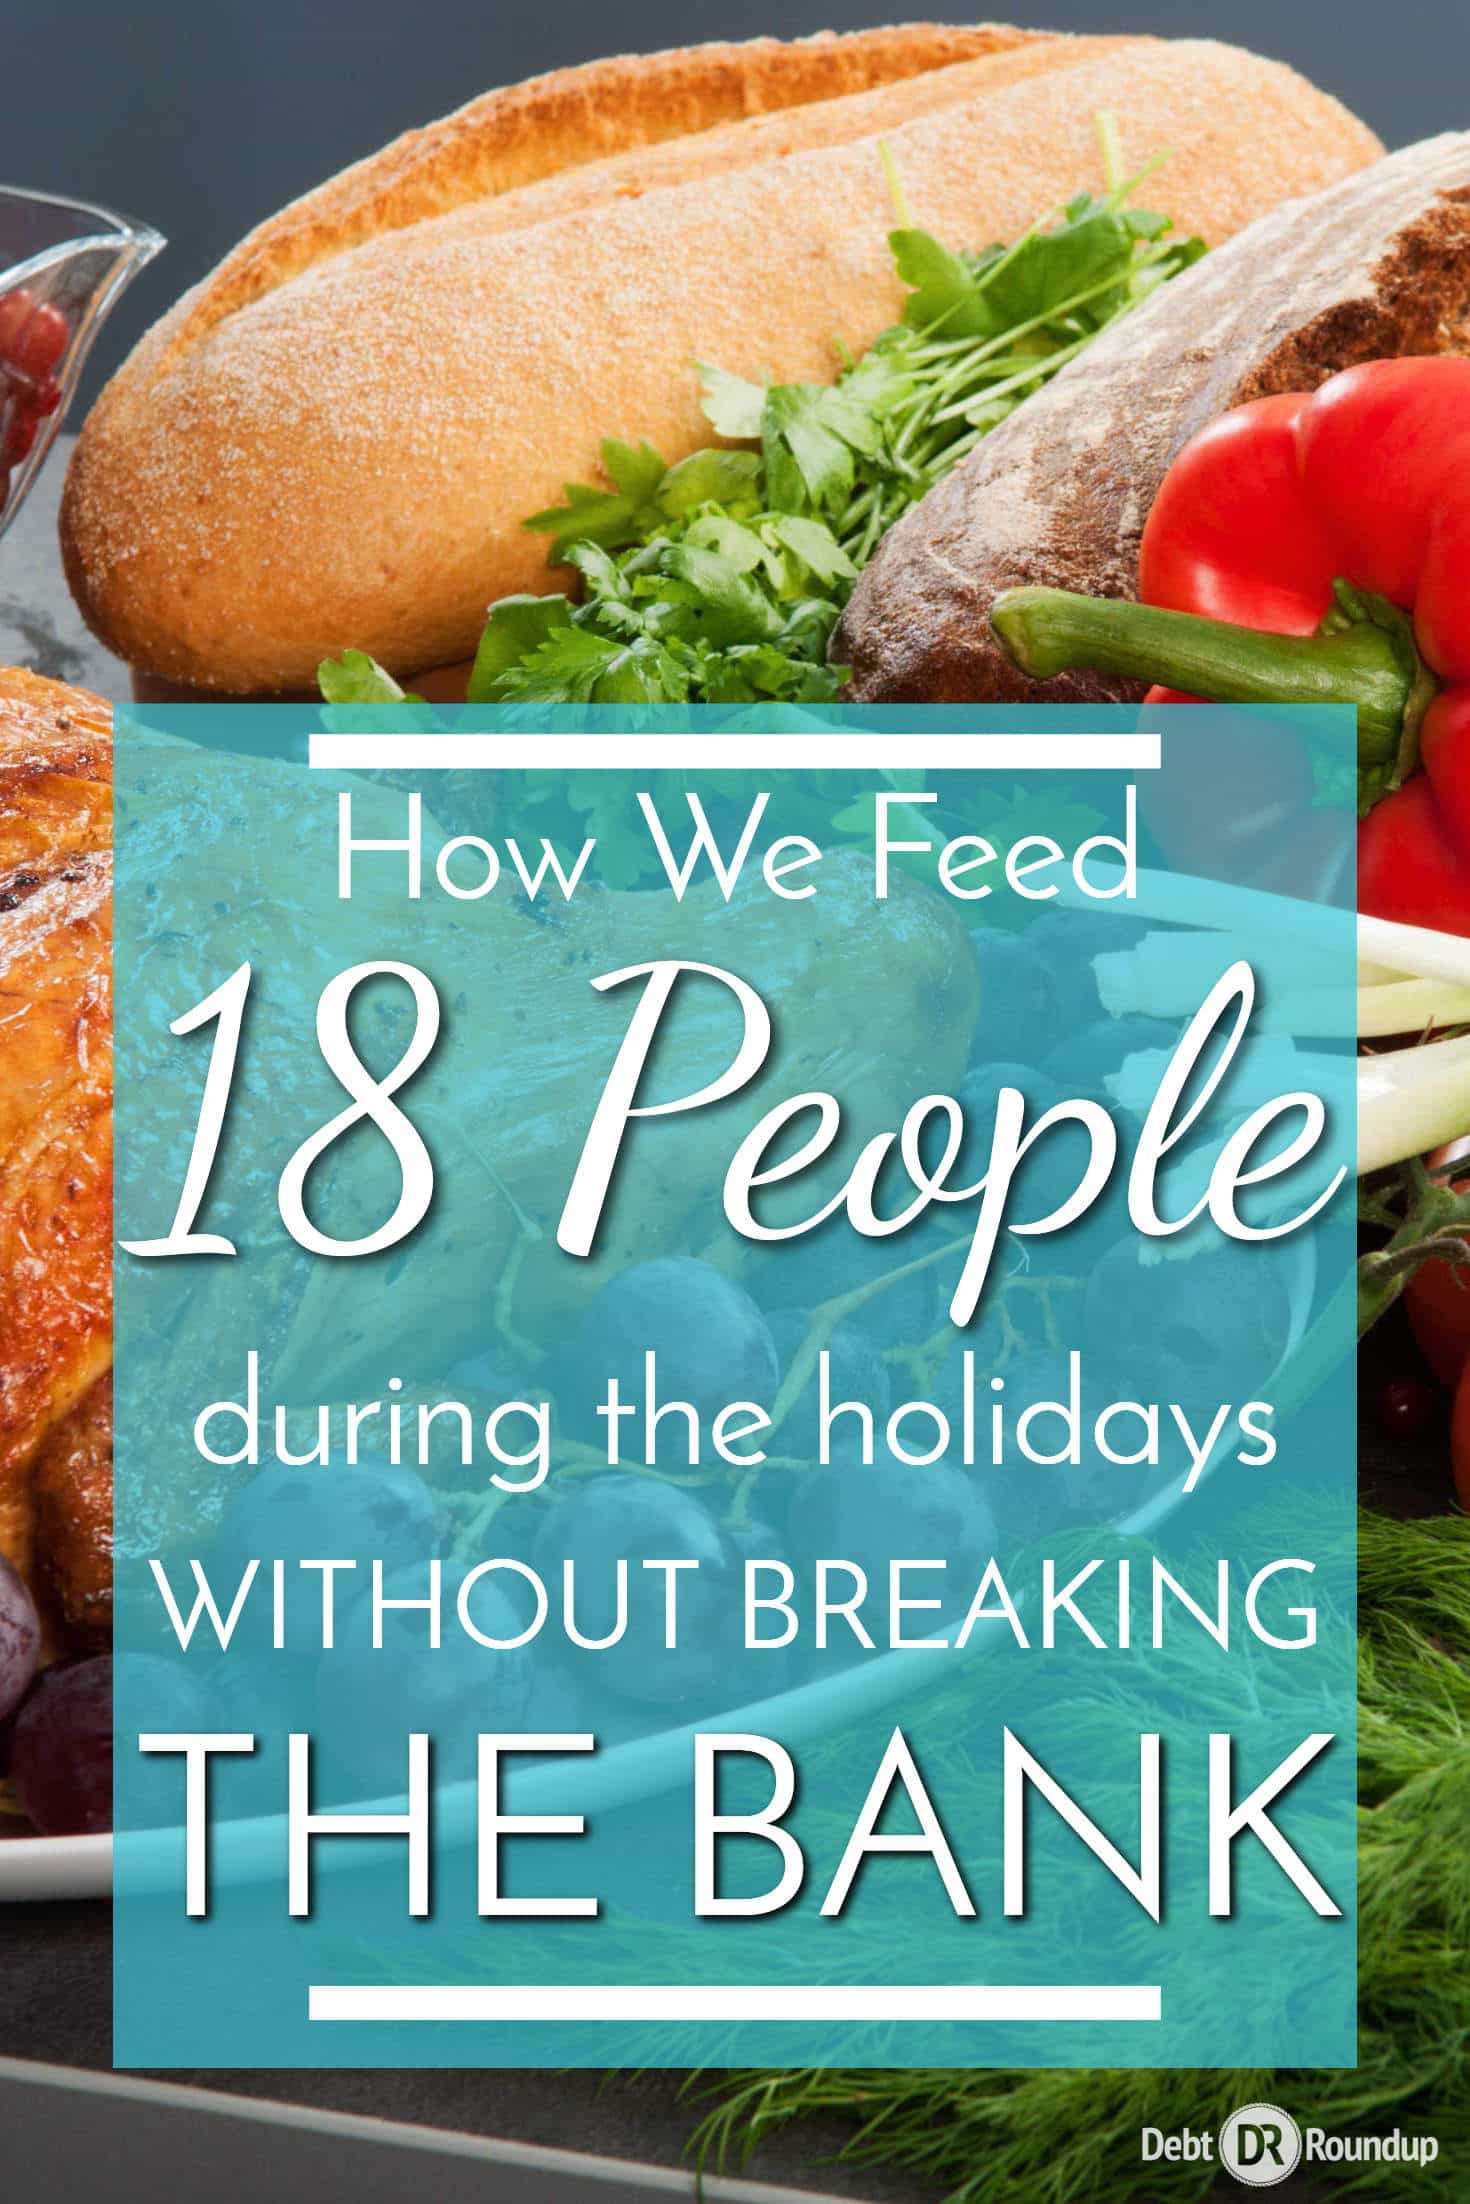 How we feed 18 people during the holidays without breaking our budget